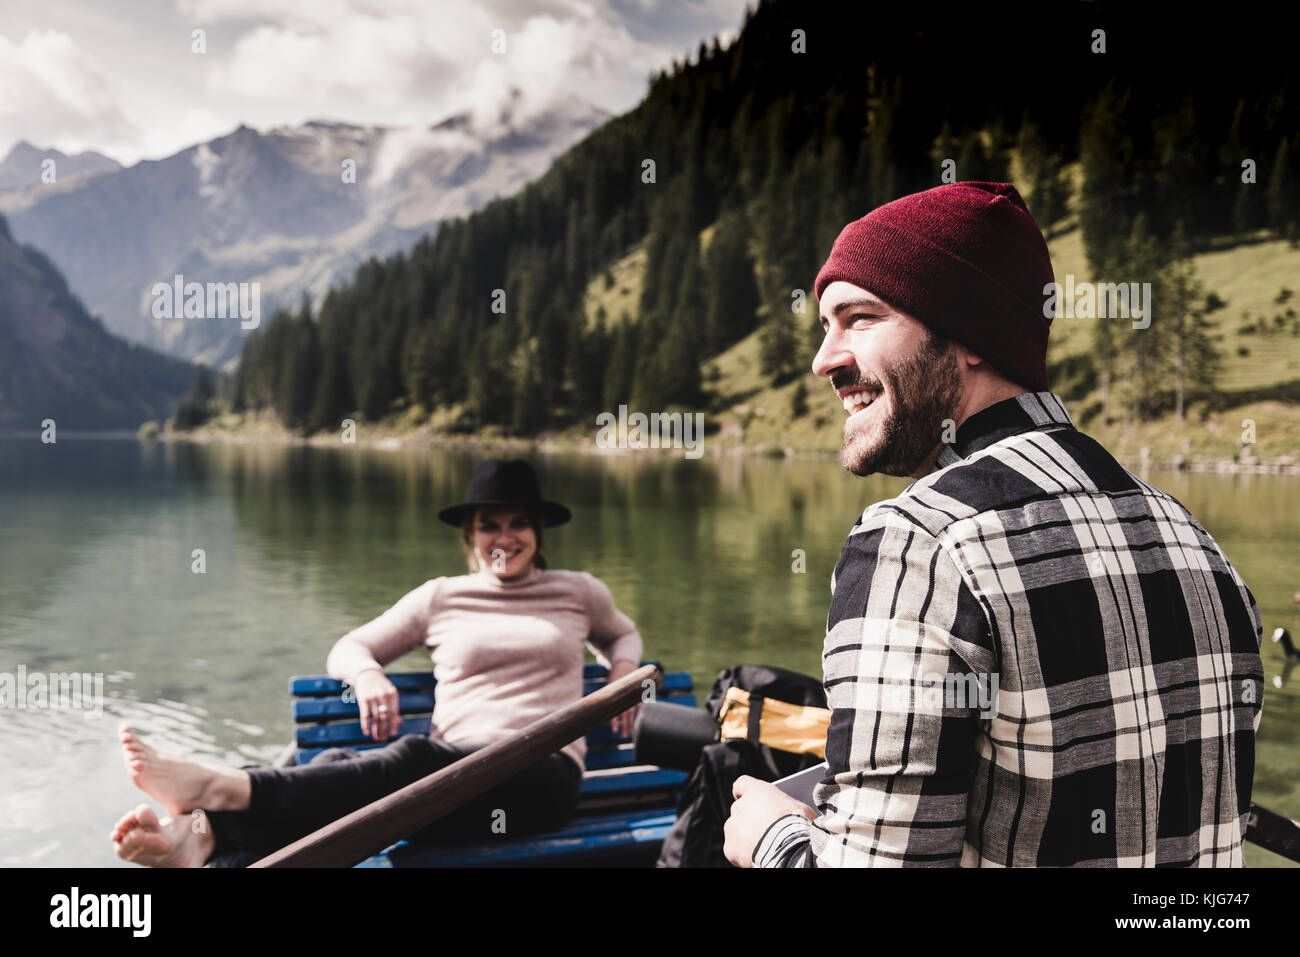 Austria, Tyrol, Alps, happy couple in rowing boat on mountain lake Stock Photo